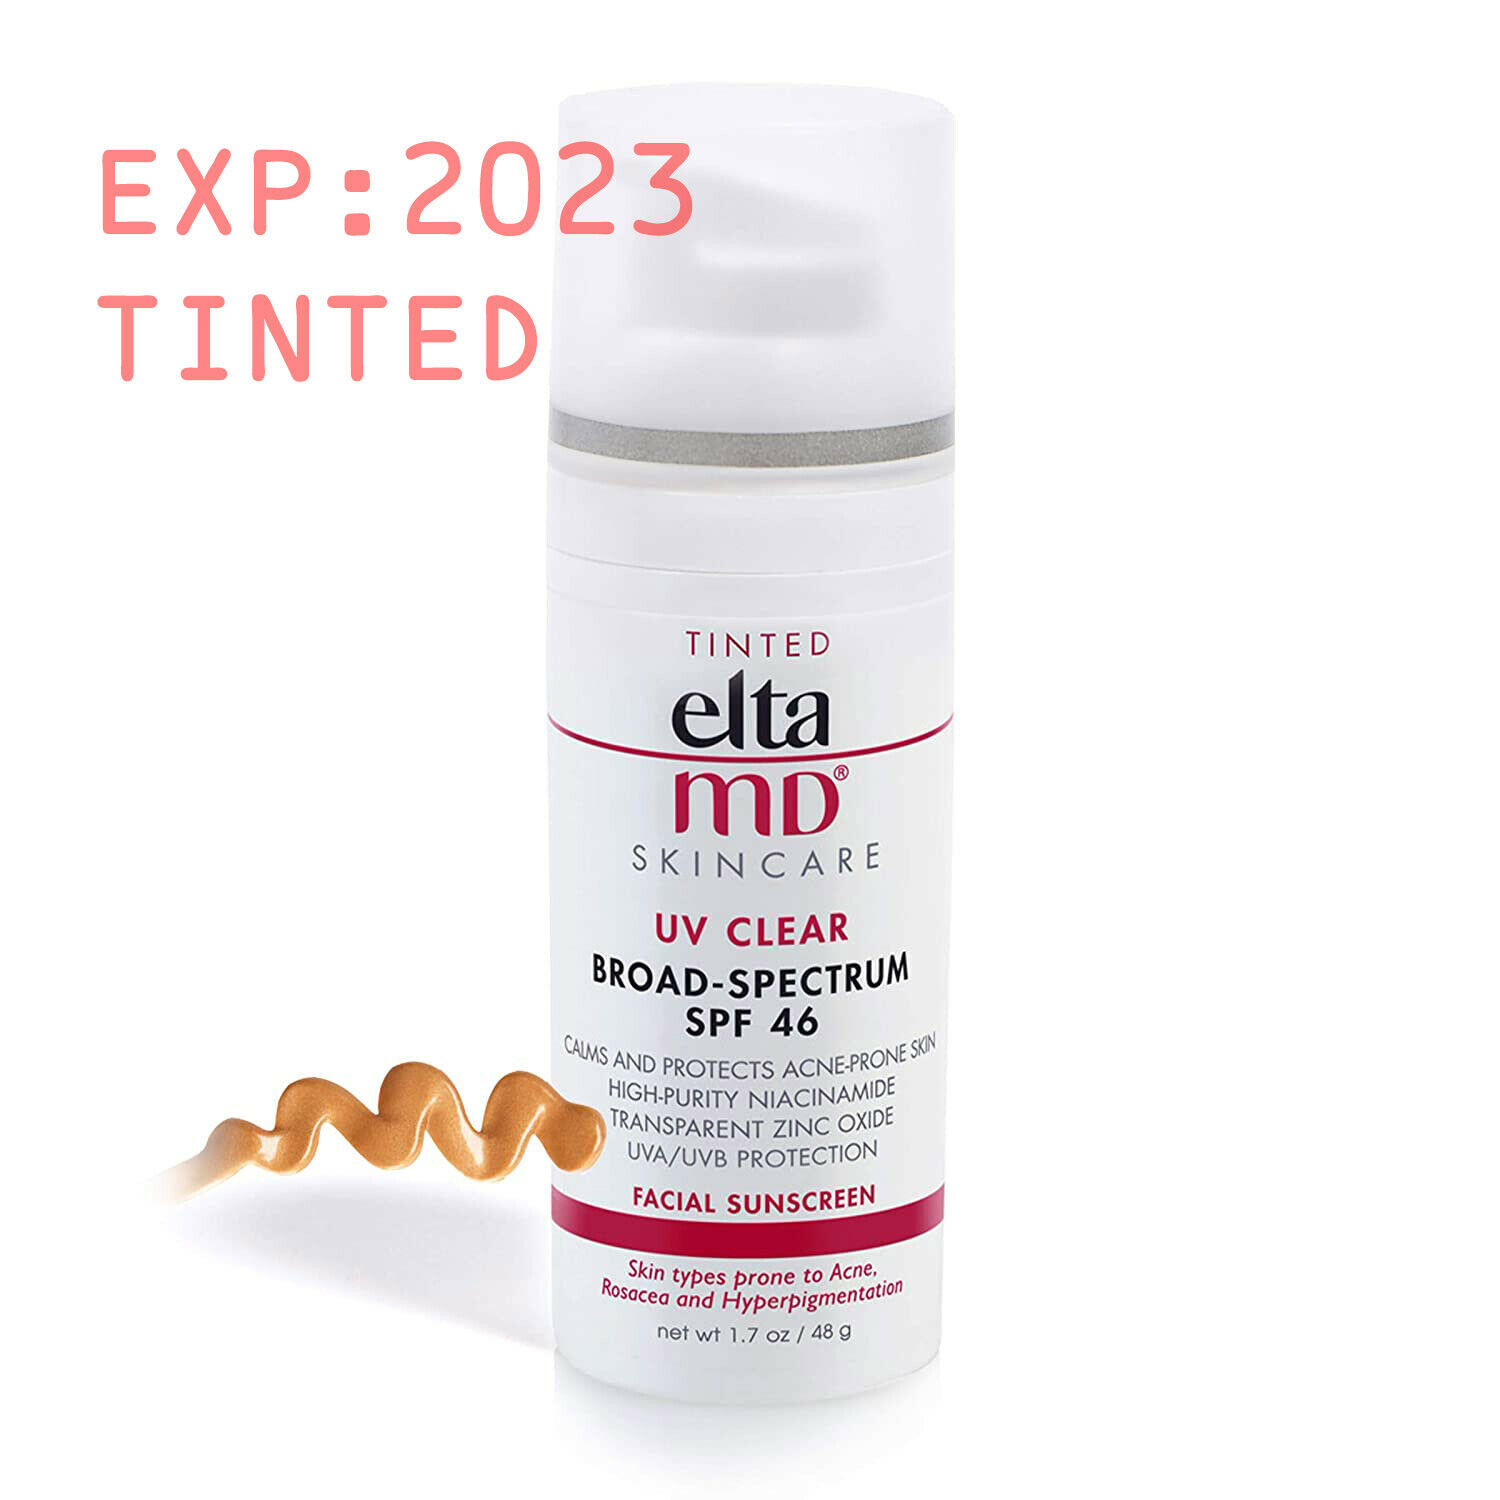 New Elta Md Uv Clear Spf 46 Tinted 1.7oz Brand